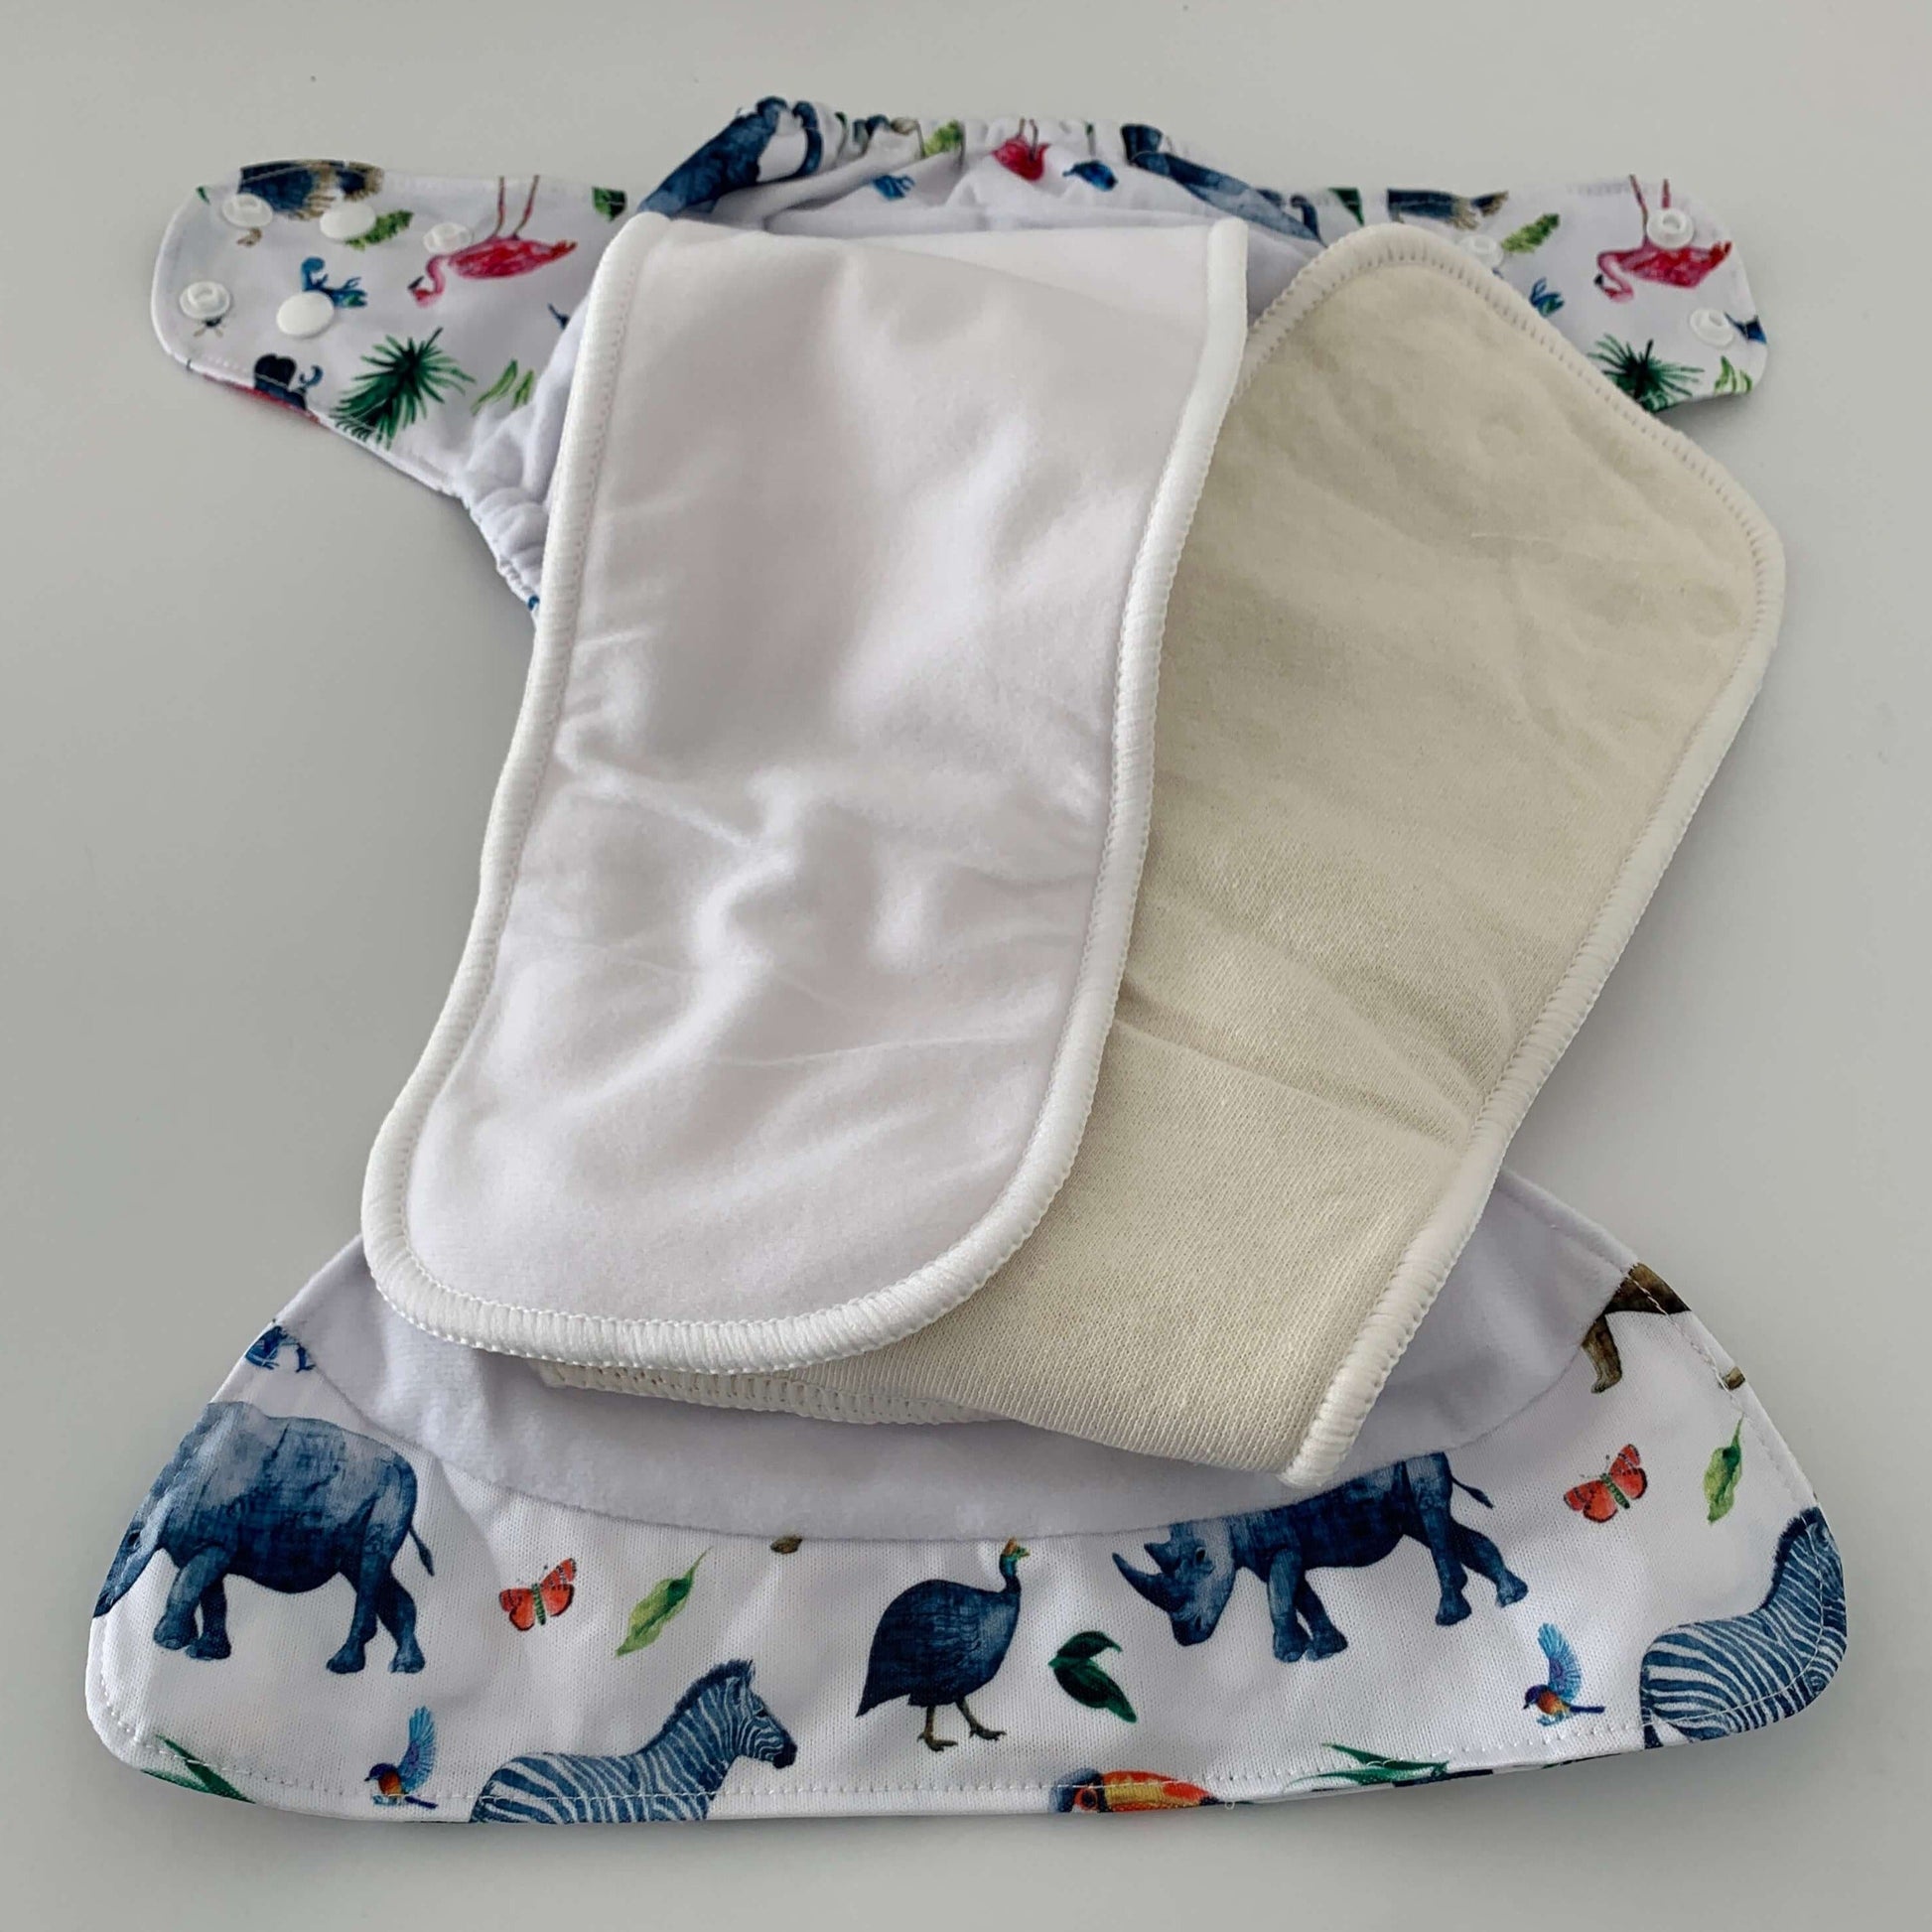 Bear & Moo Reusable Cloth Nappy in Botanical Leaves print | Luxe